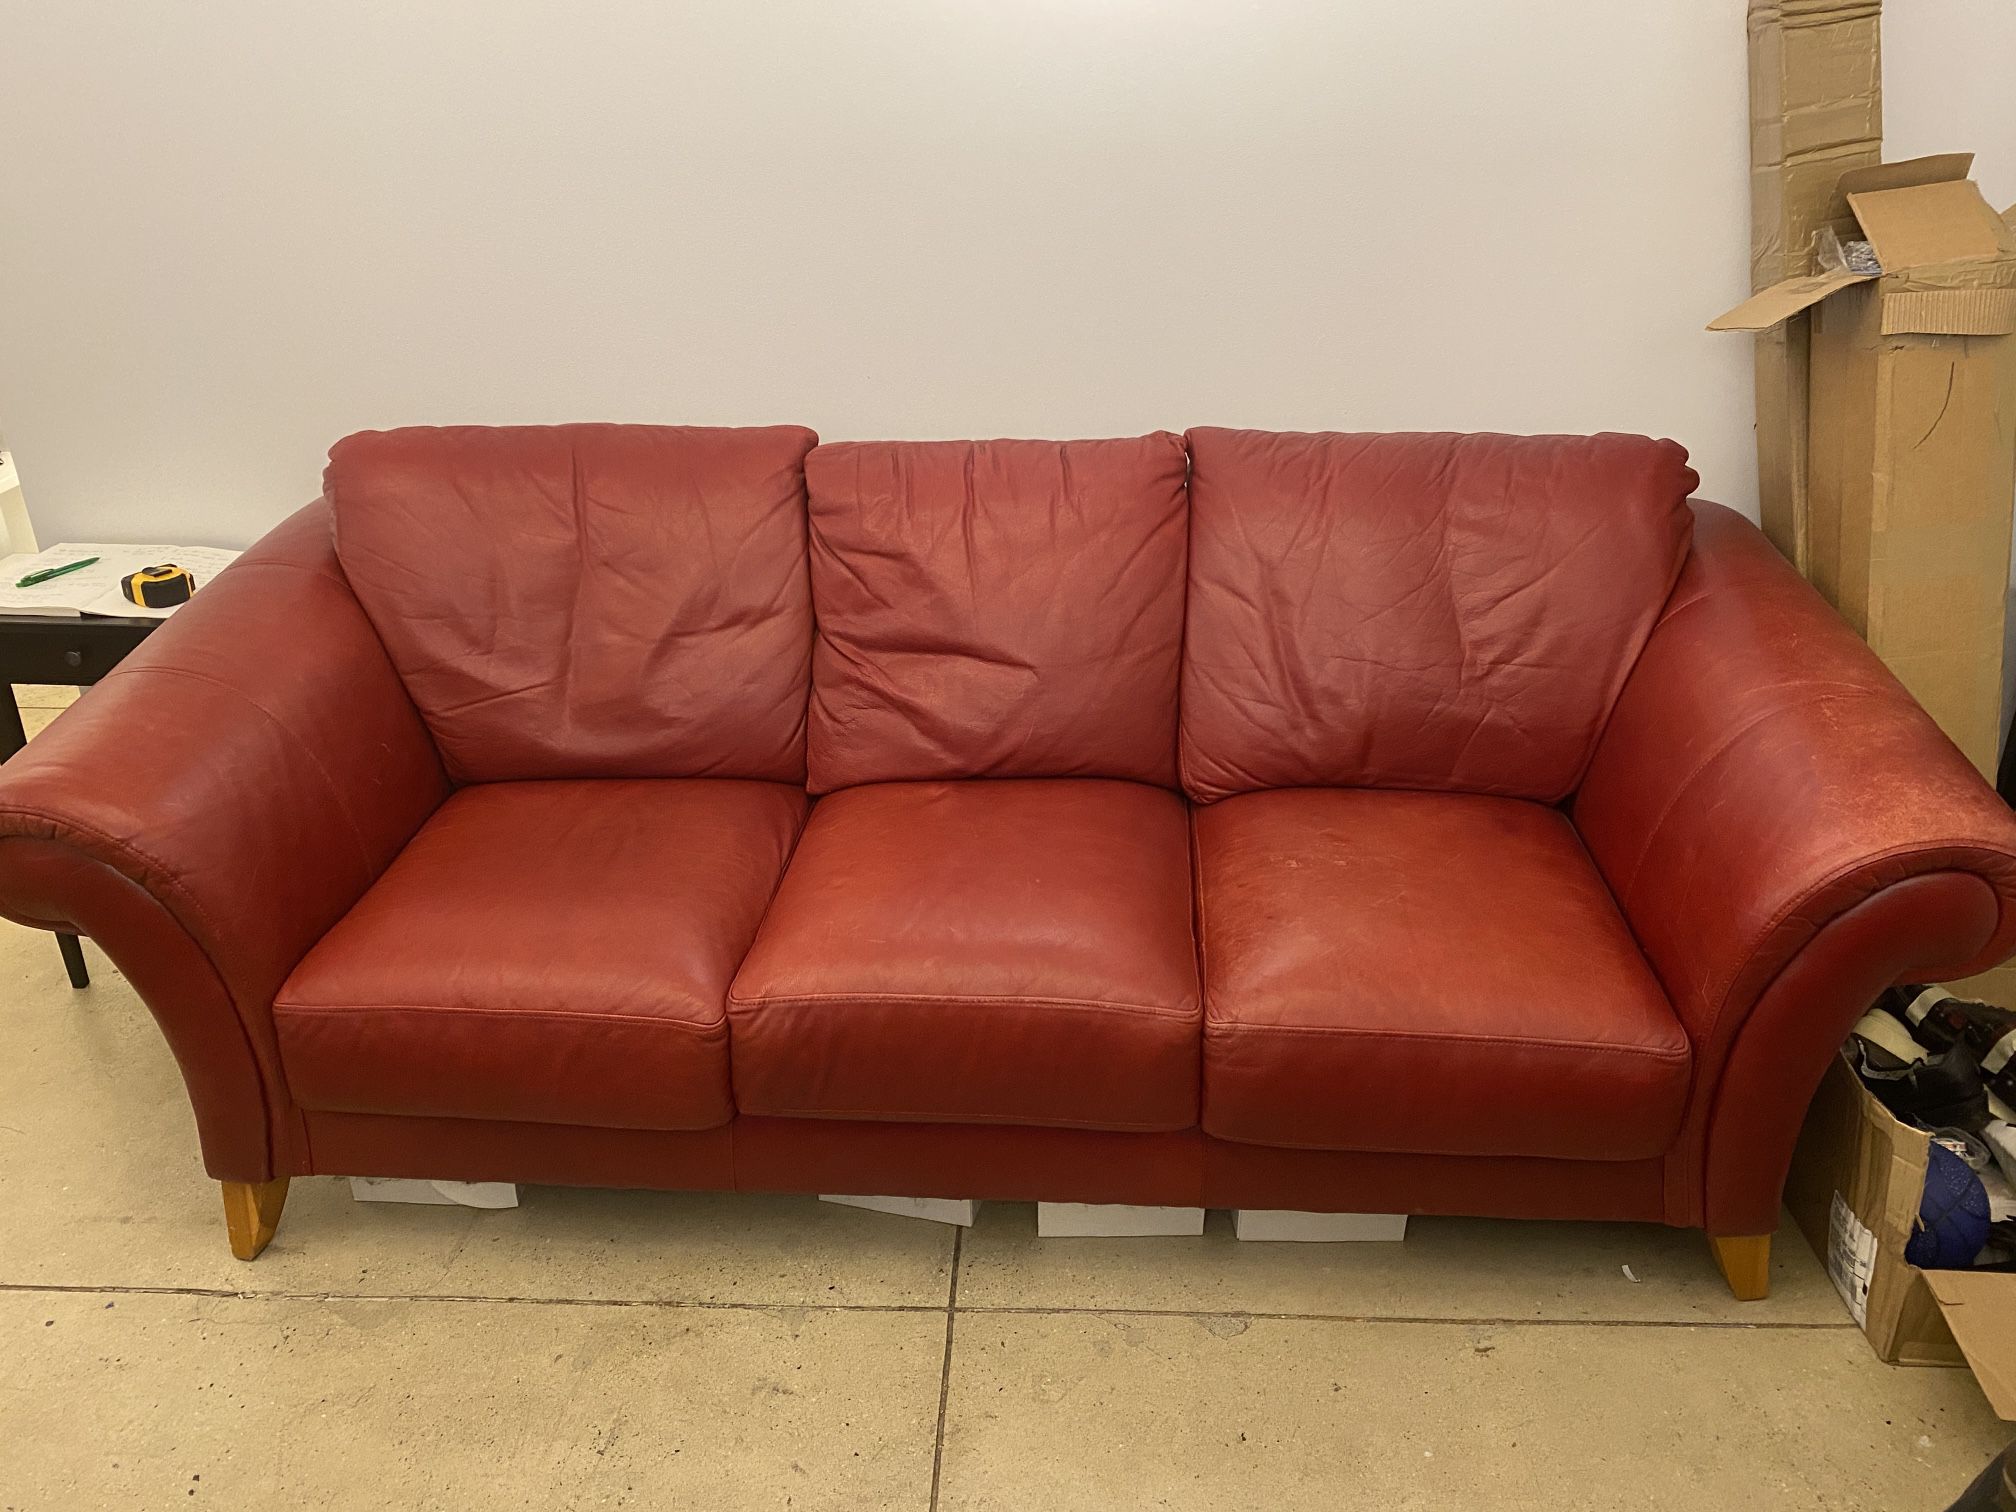 3 Seater Red Leather Couch